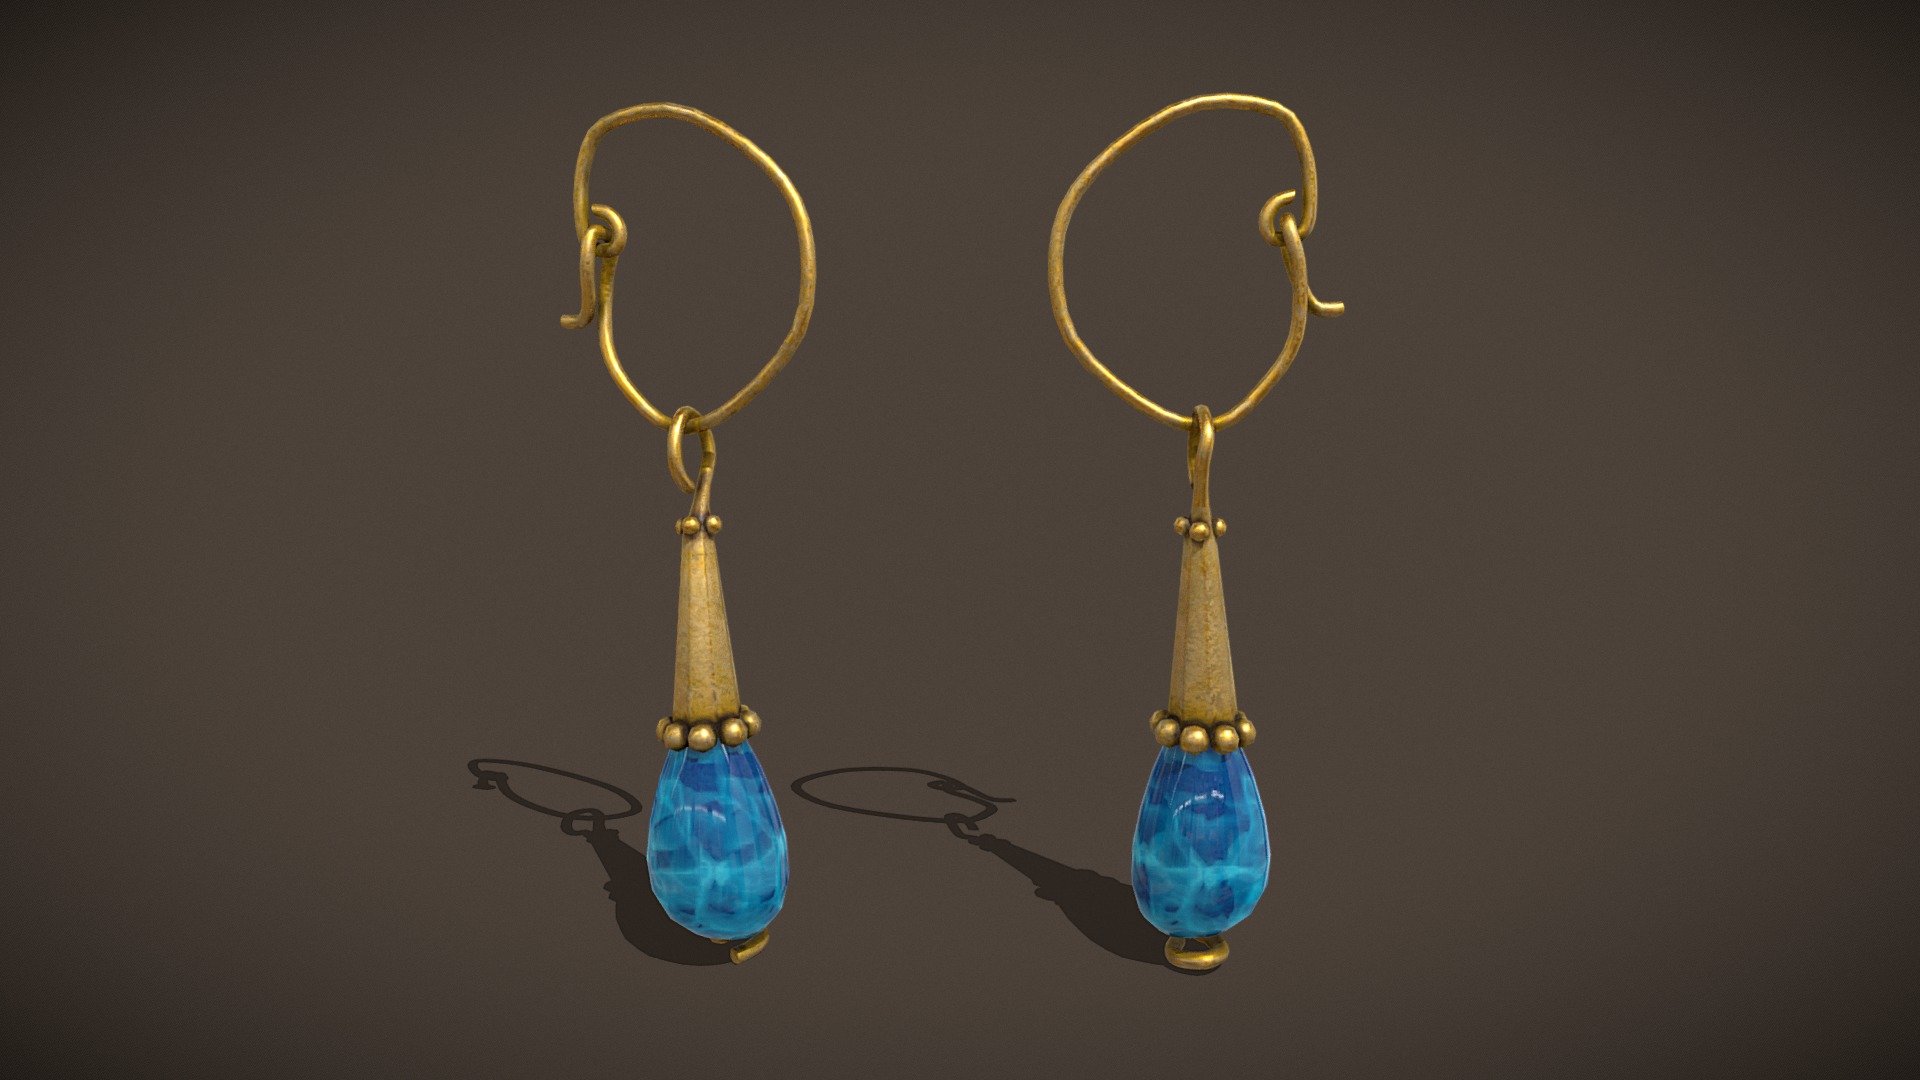 Calcite_Earrings_FBX
VR / AR / Low-poly
PBRapproved
GeometryPolygon mesh
Polygons2,460
Vertices2,408
Textures - Blue Calcite Earrings - Buy Royalty Free 3D model by GetDeadEntertainment 3d model